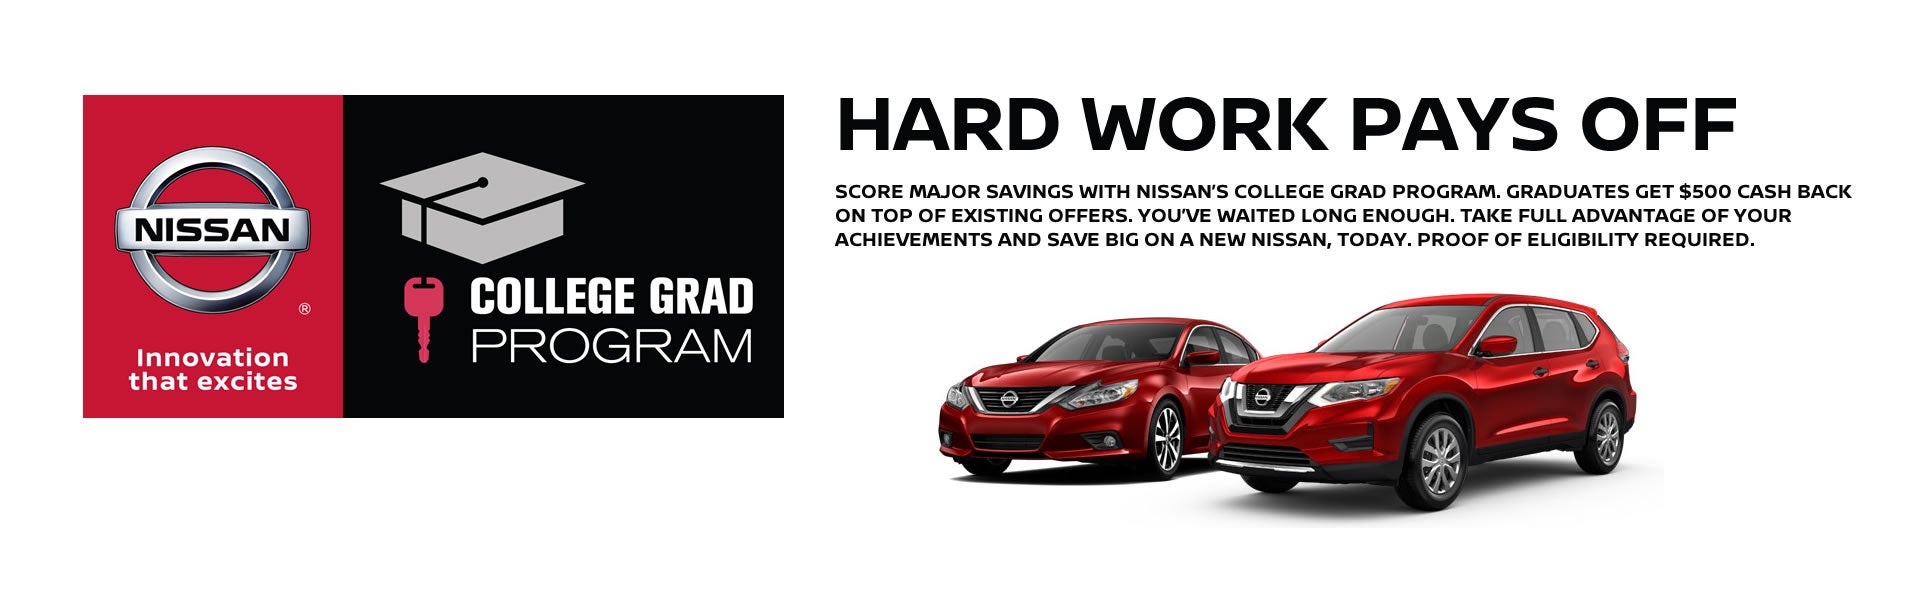 Nissan Dealer in Wake Forest, NC | Used Cars Wake Forest | Crossroads